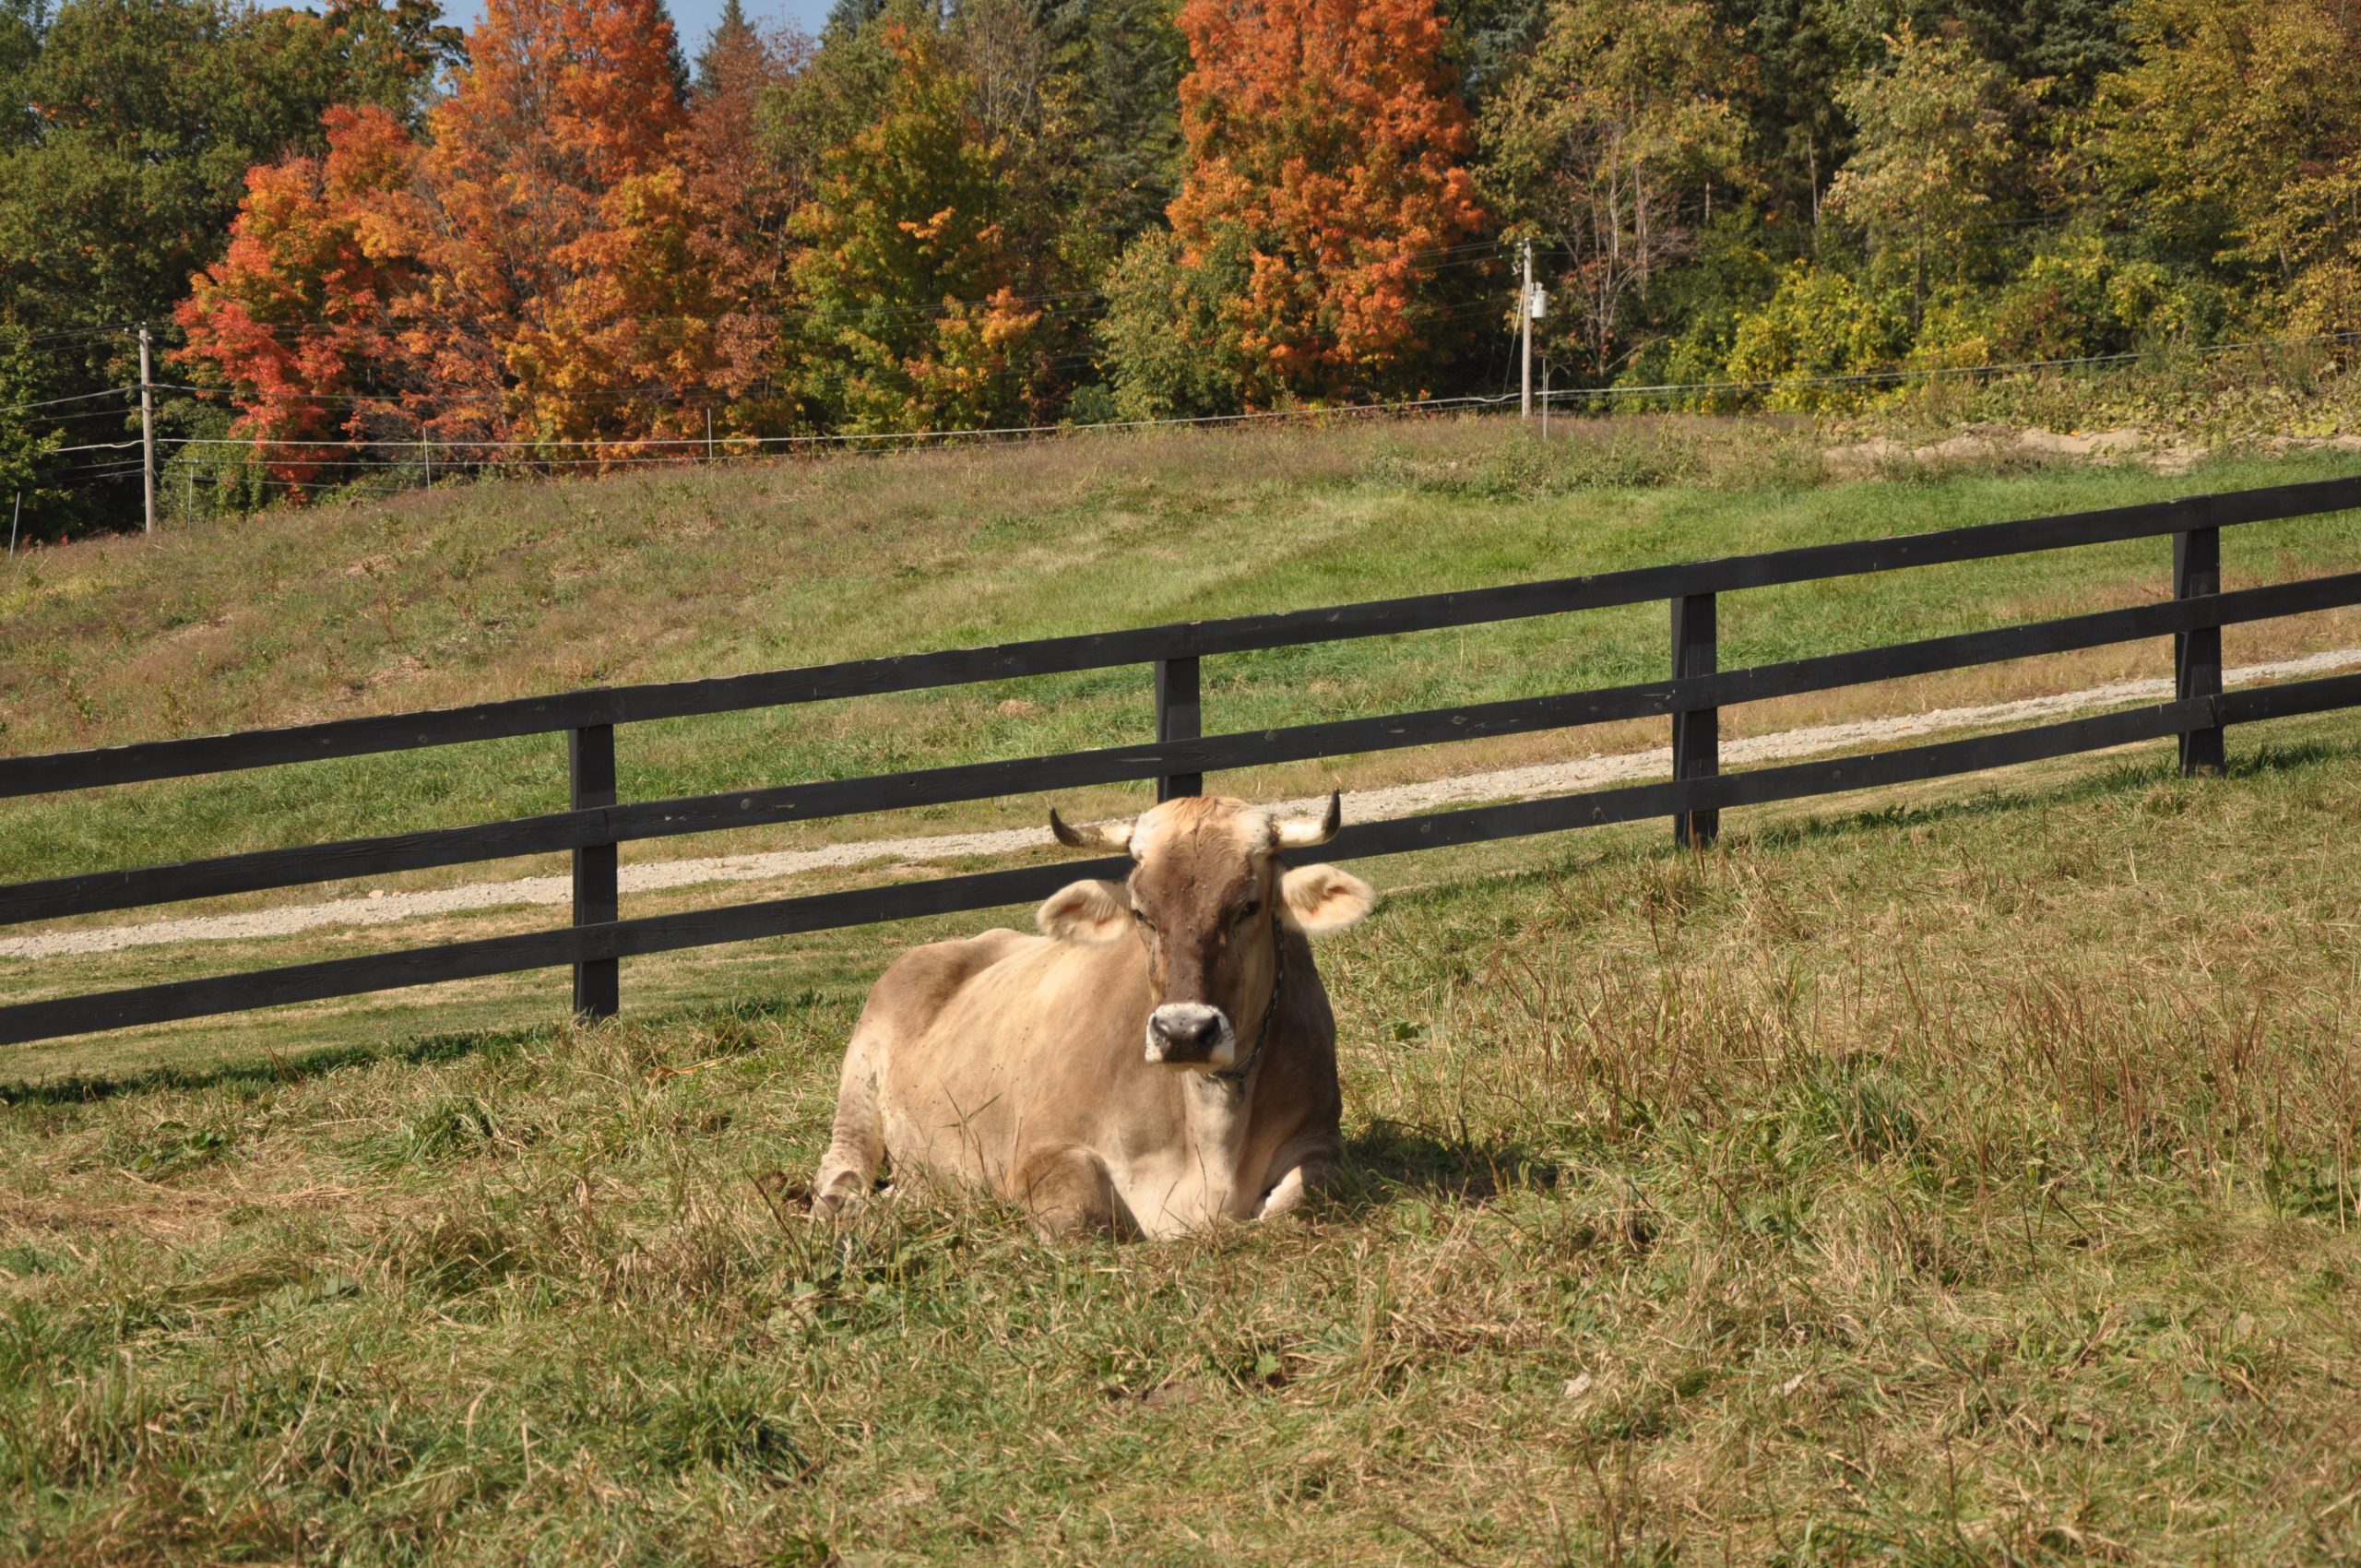 Cow Relaxing In The Pasture (user submitted)